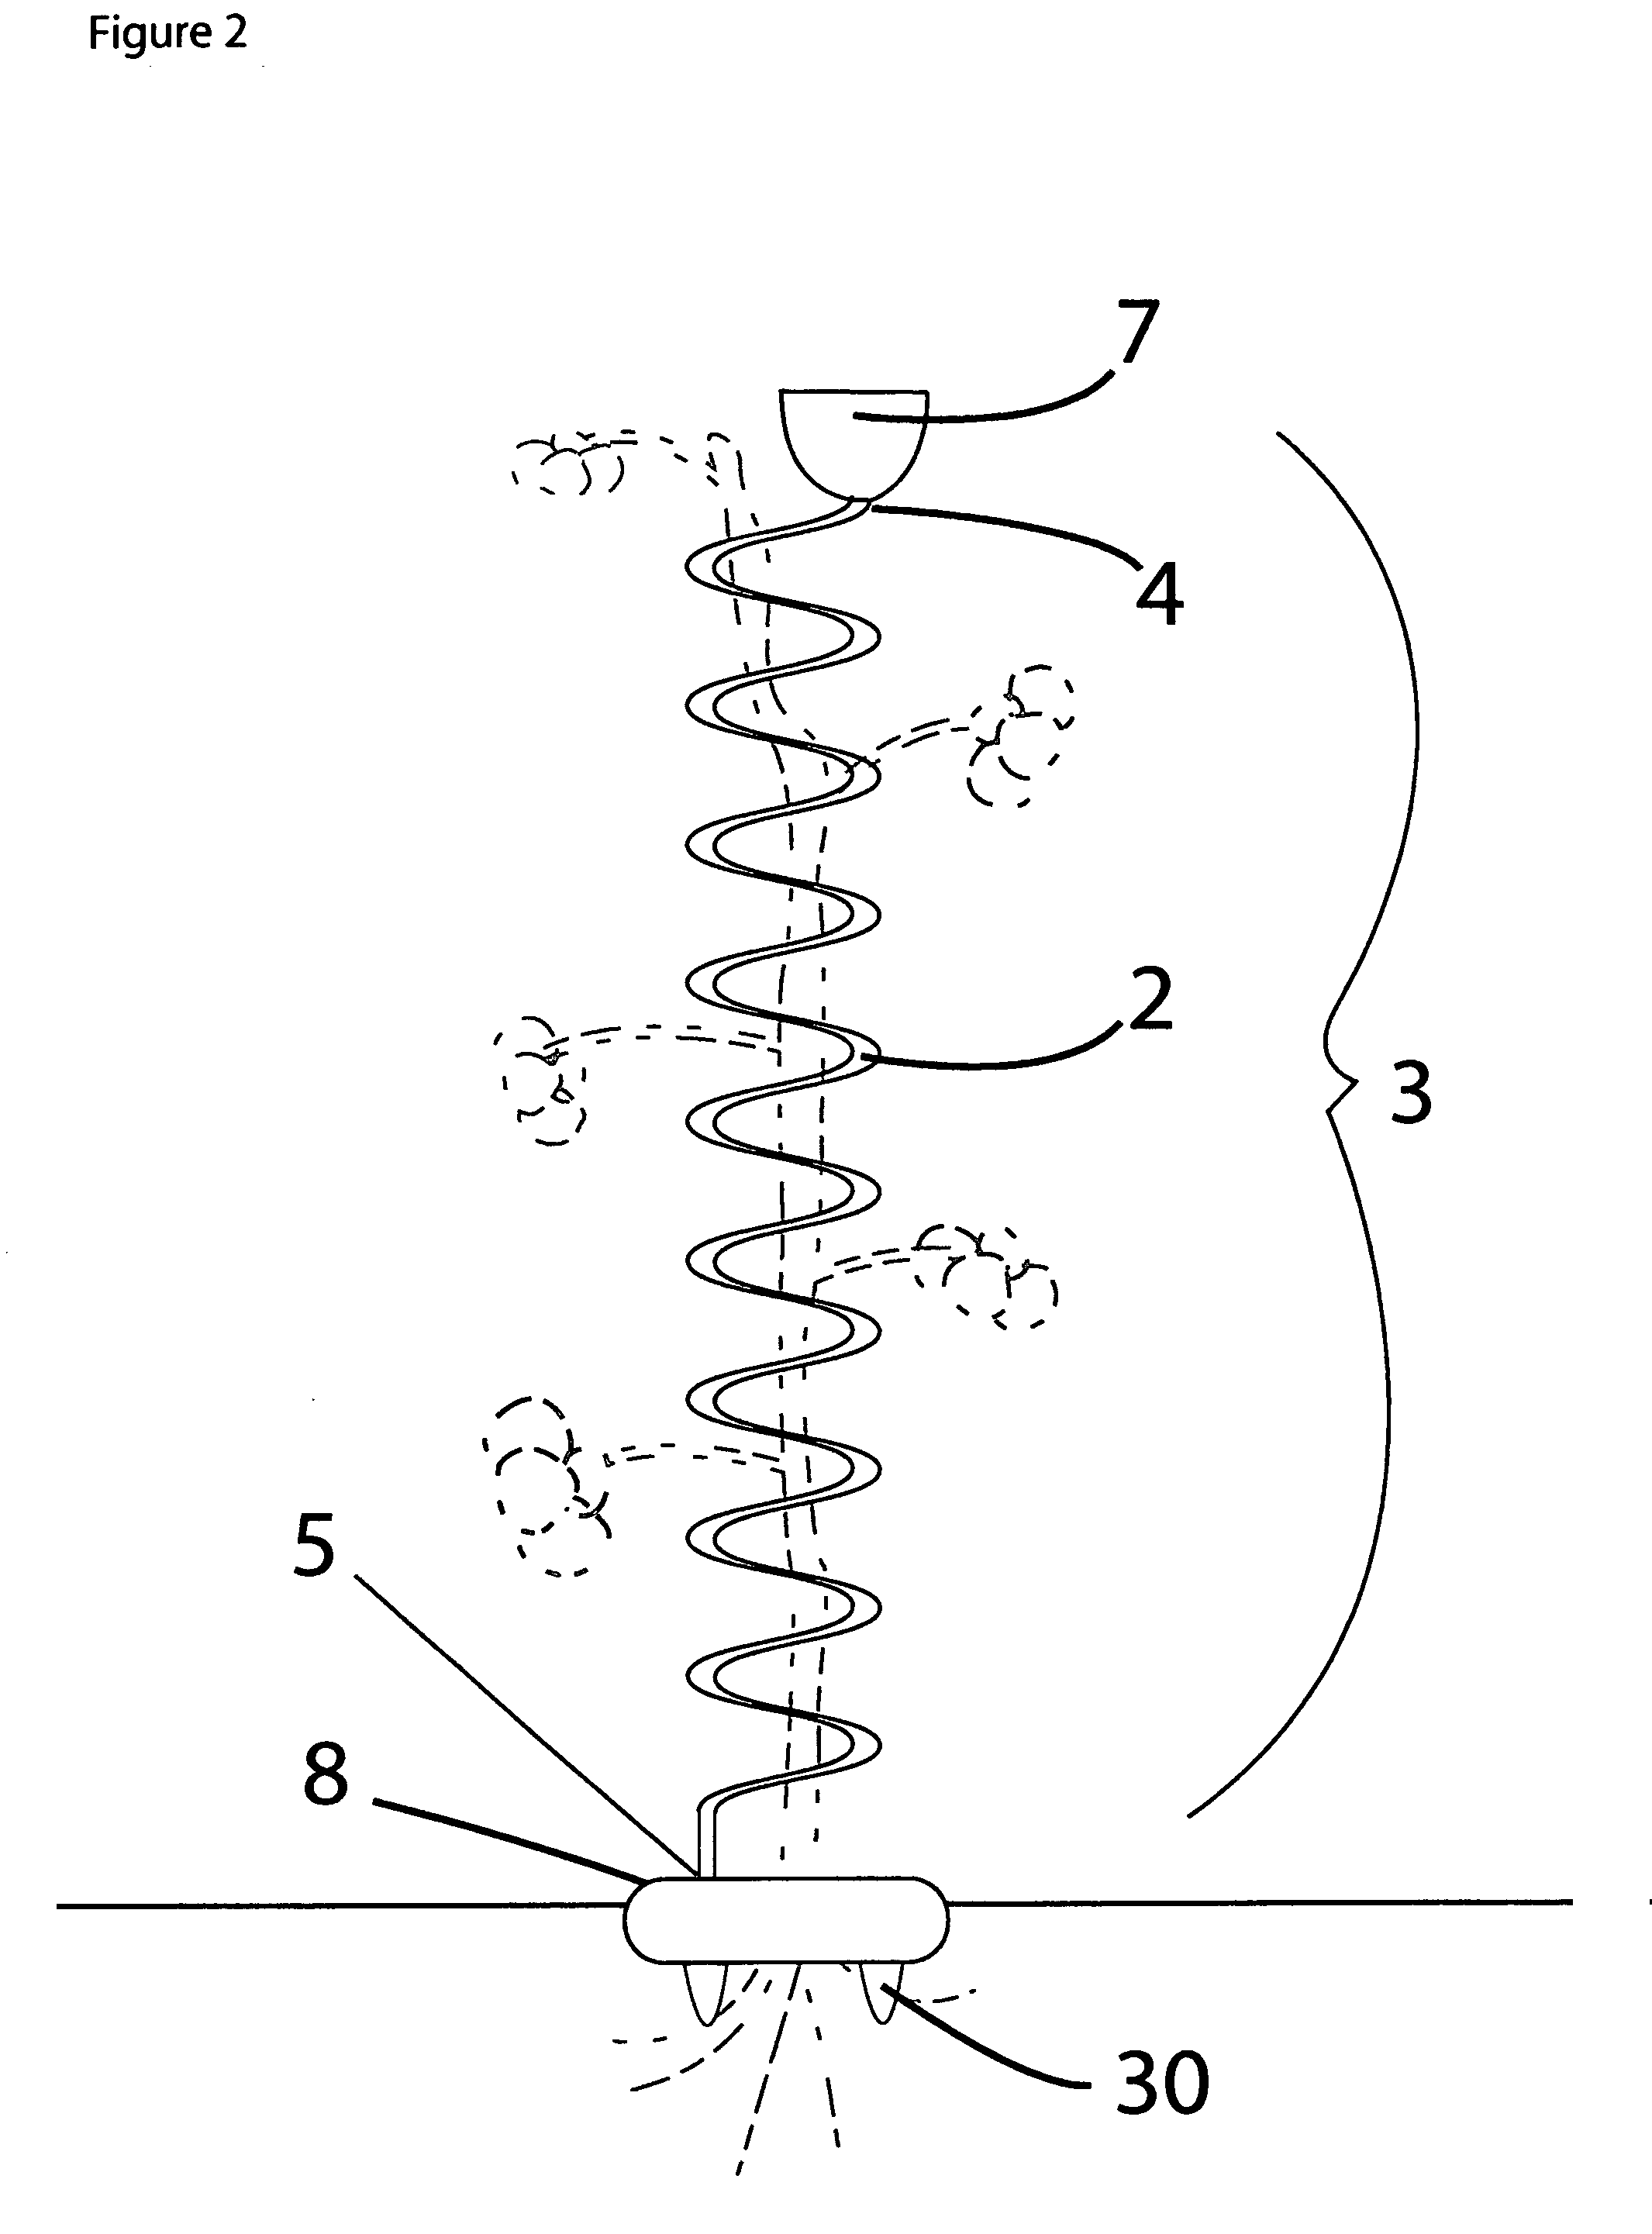 Plant support and water displacement apparatus